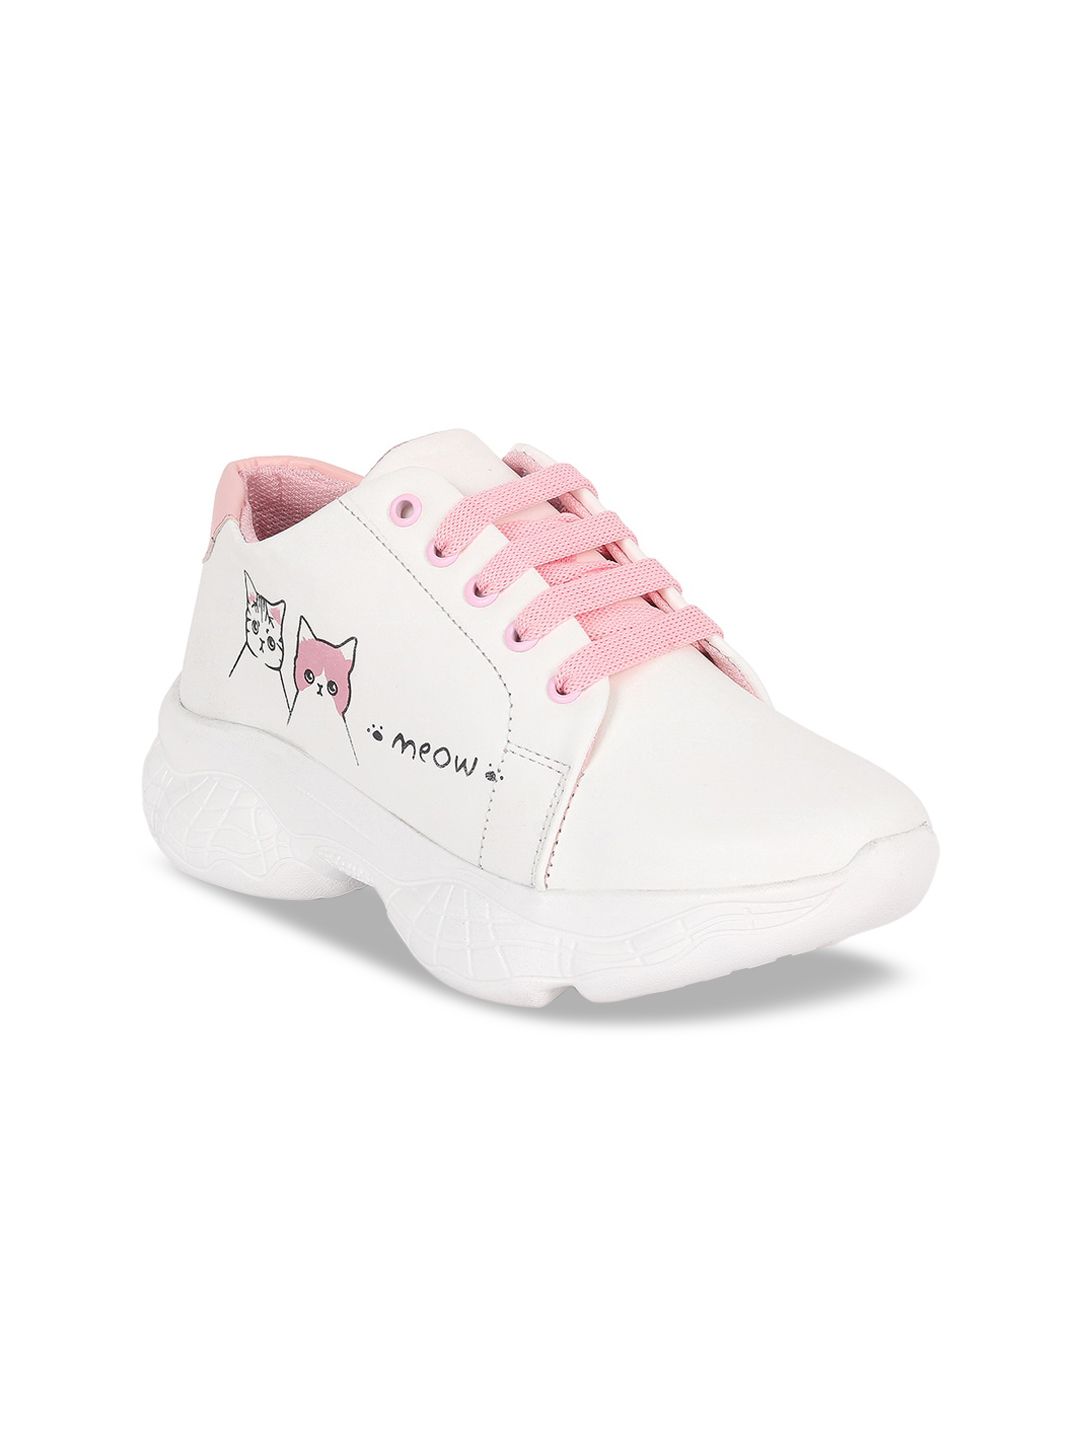 Bella Toes Women White & Pink Printed Sneakers Casual Shoes Price in India